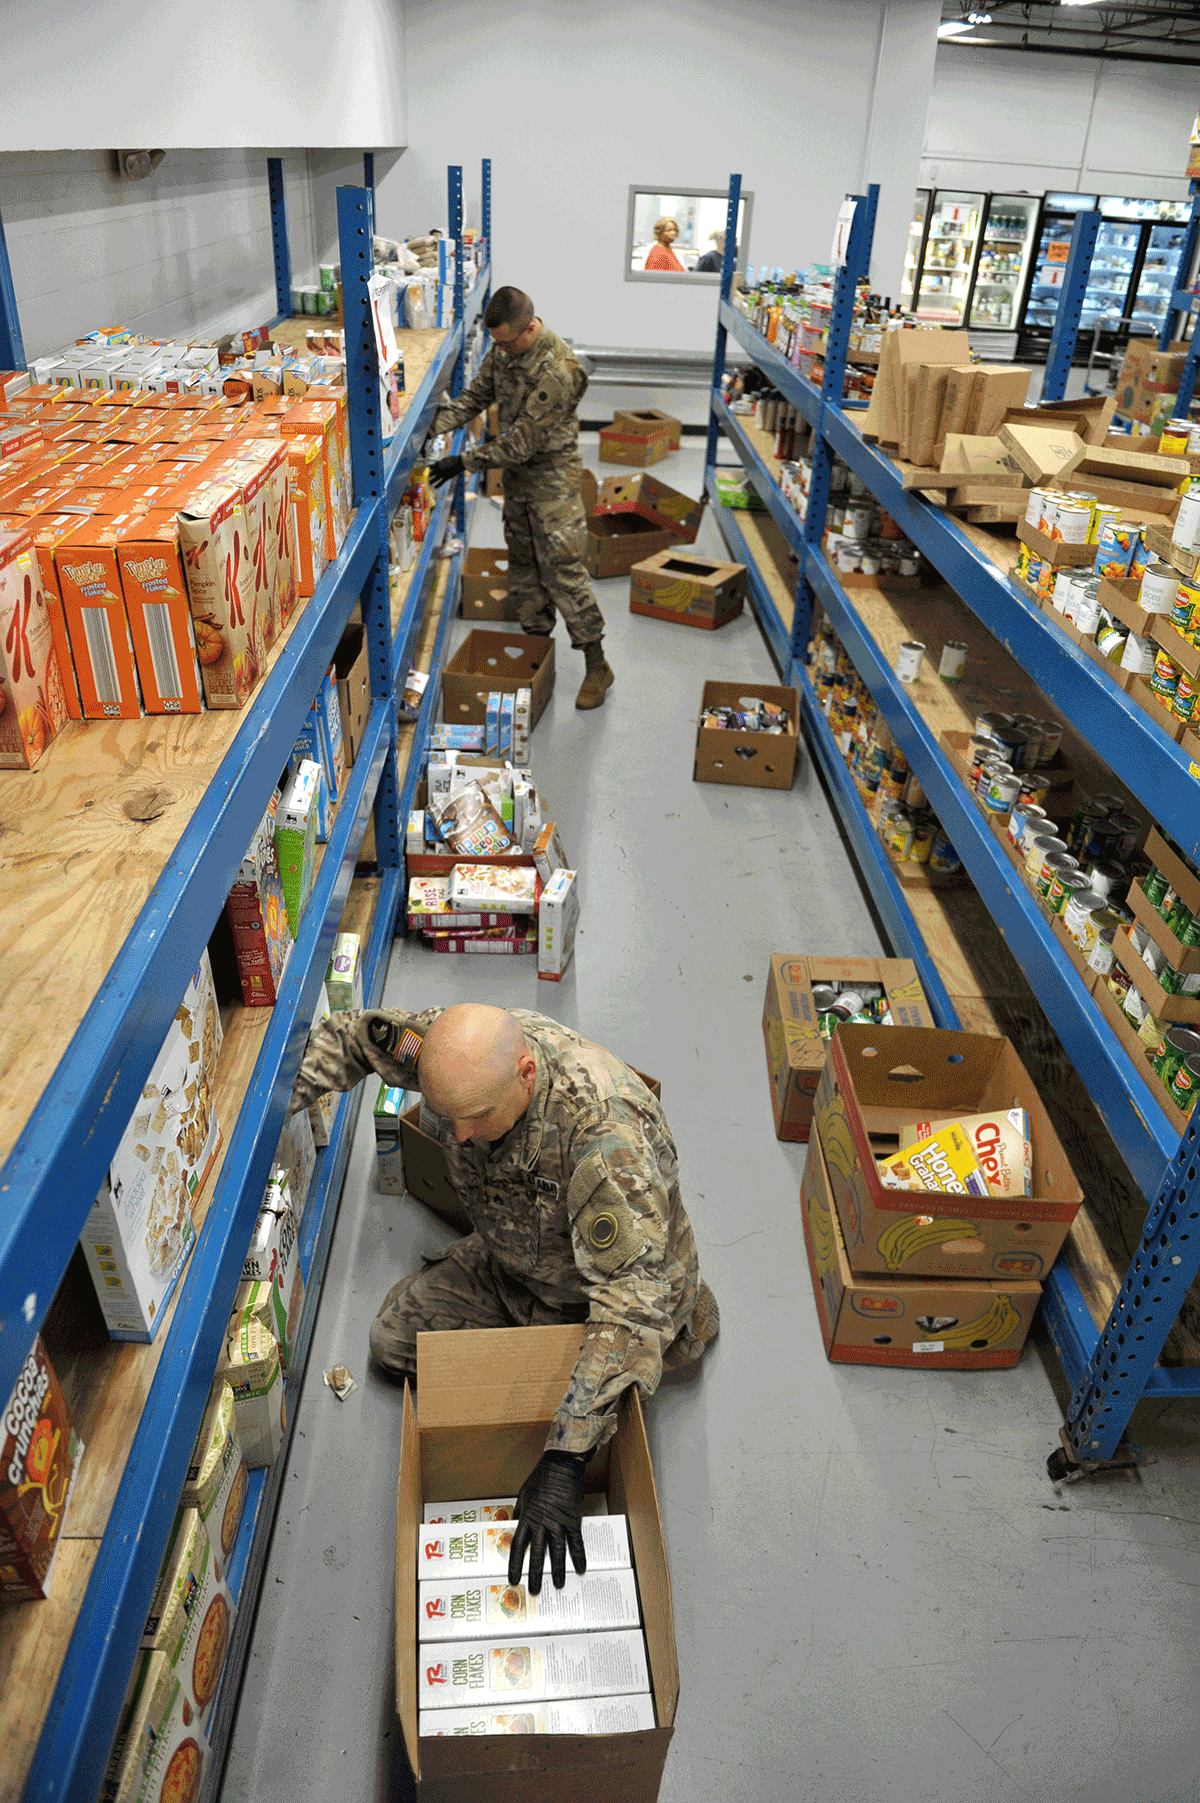 Soldiers pull items from shelves in isle in warehouse.